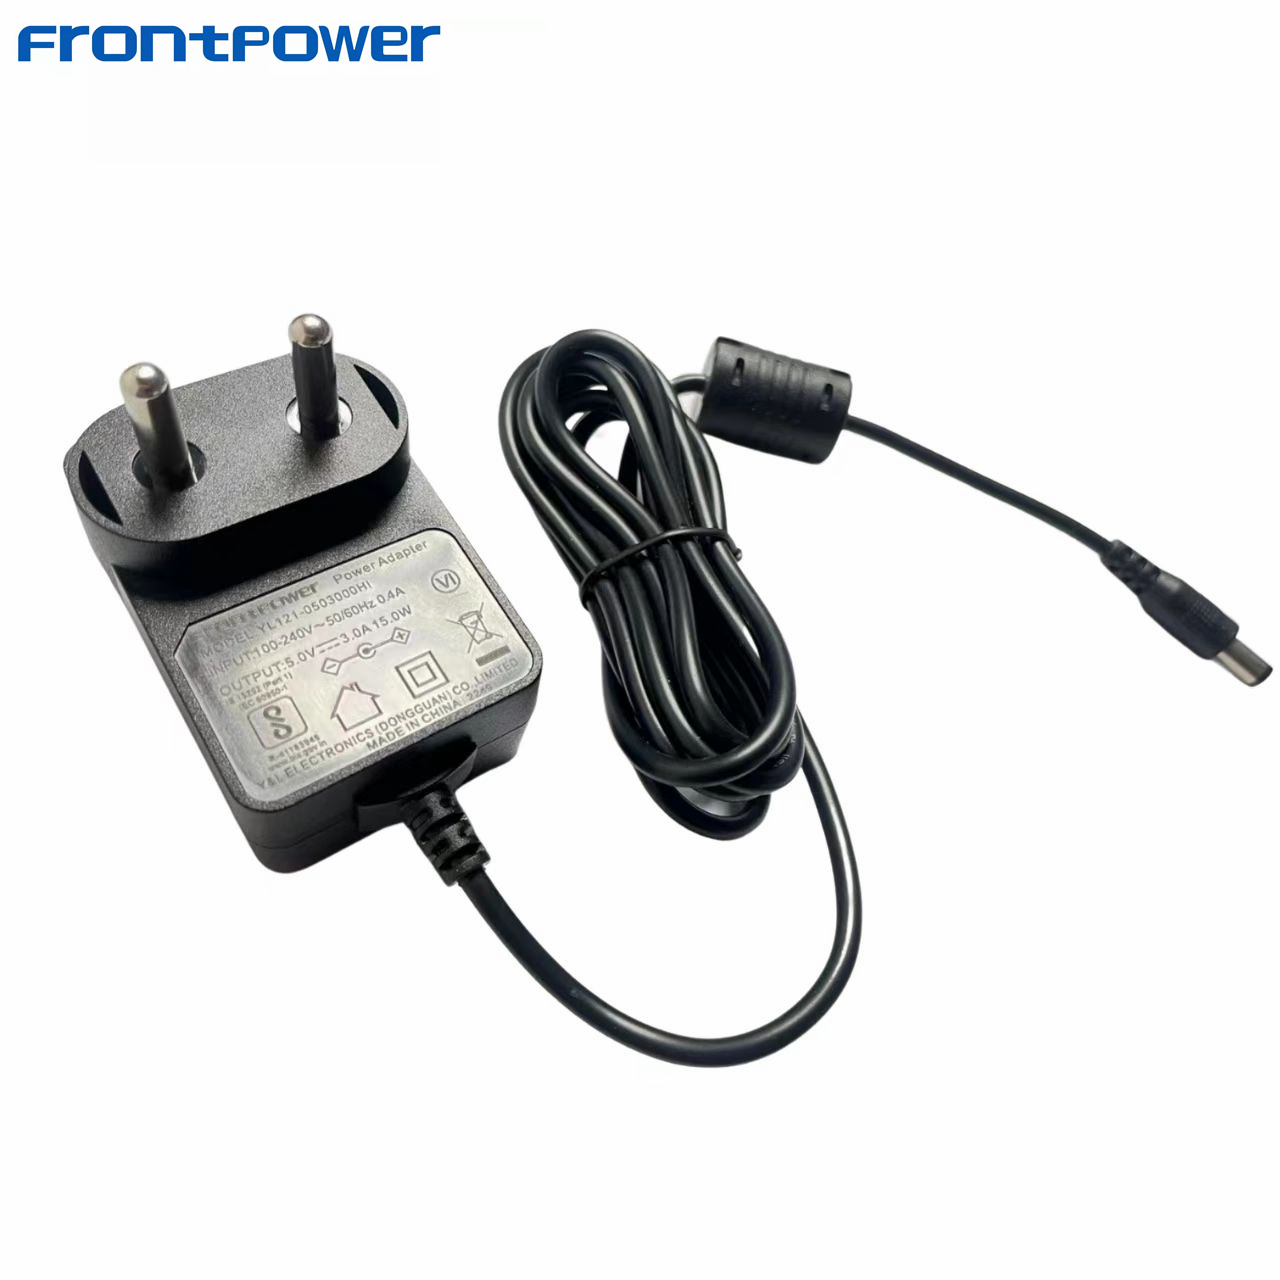 India adapter wall plug 5v charger switching 5V 3A 5V 2.5A 5V 2.4A 5V1A adapter for robot with BIS approval